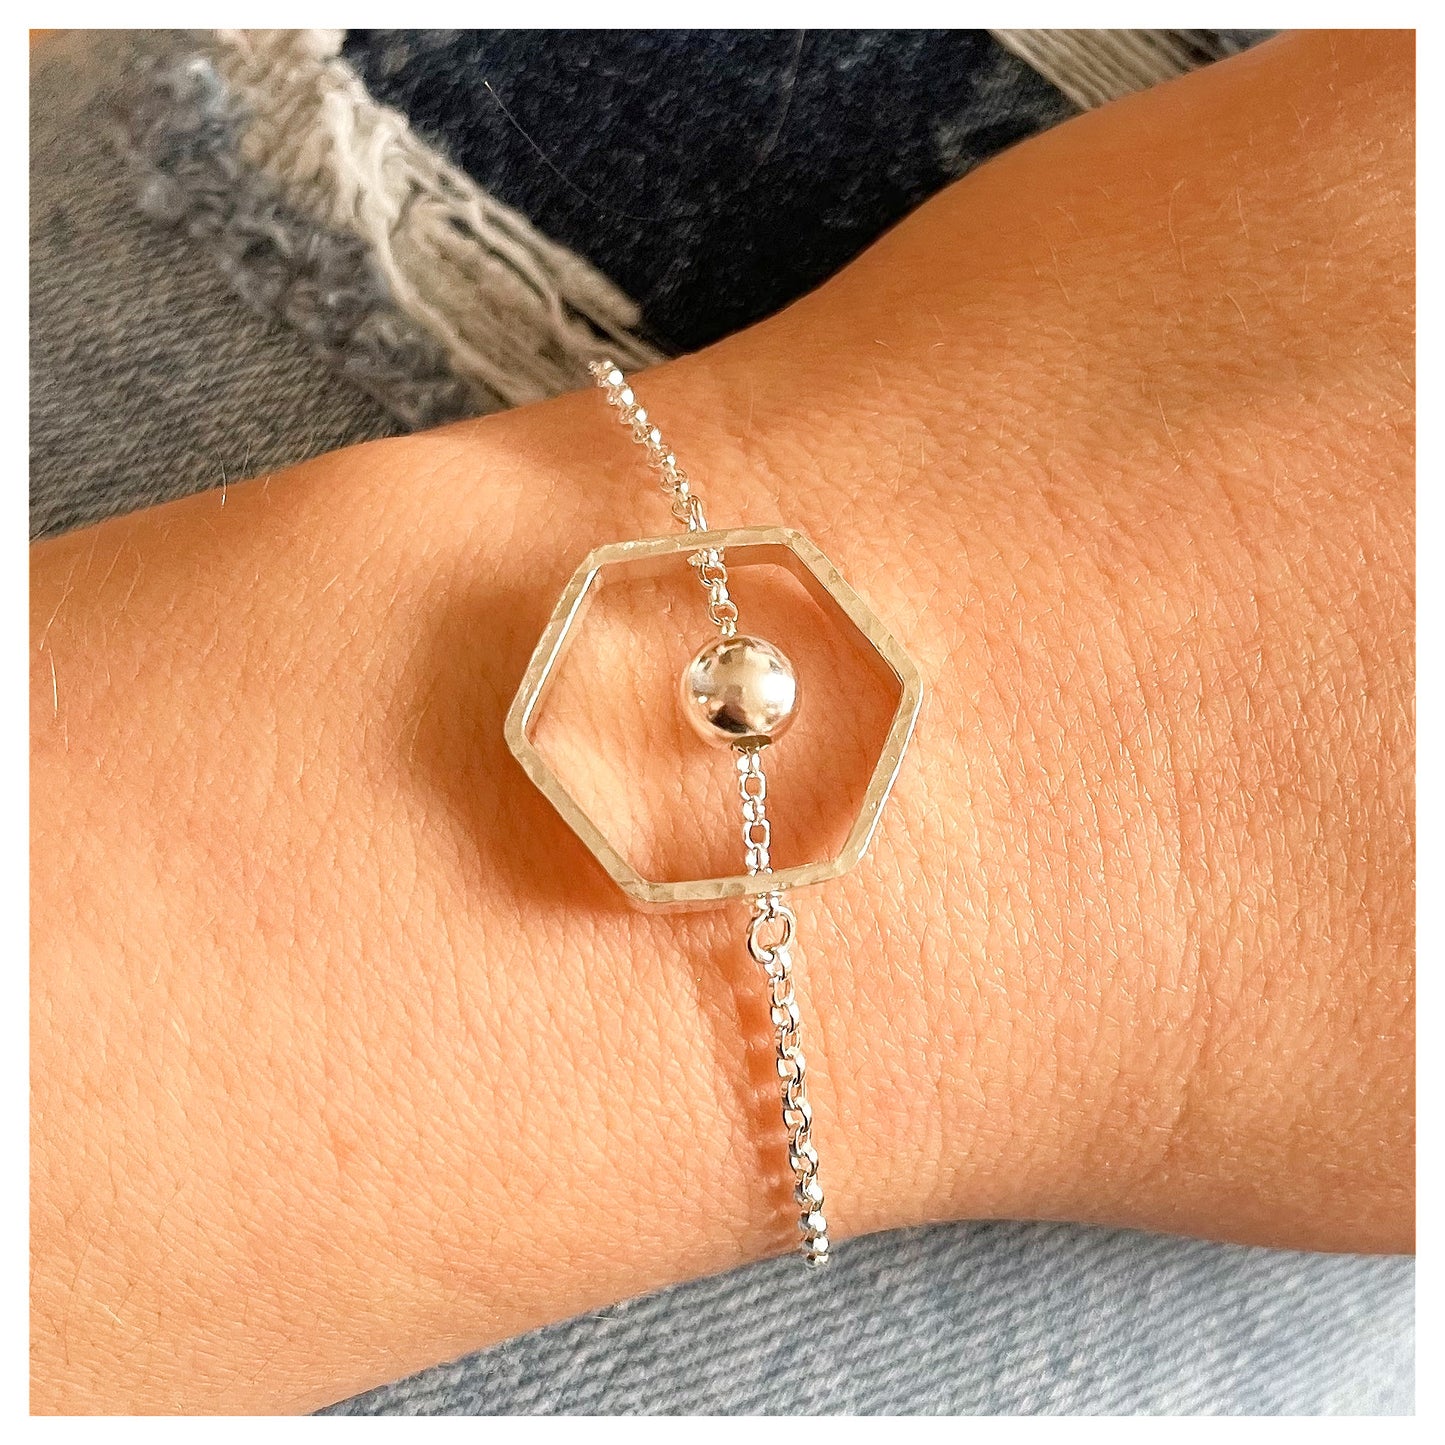 Sterling Silver Hexagonal Bracelet with Bead